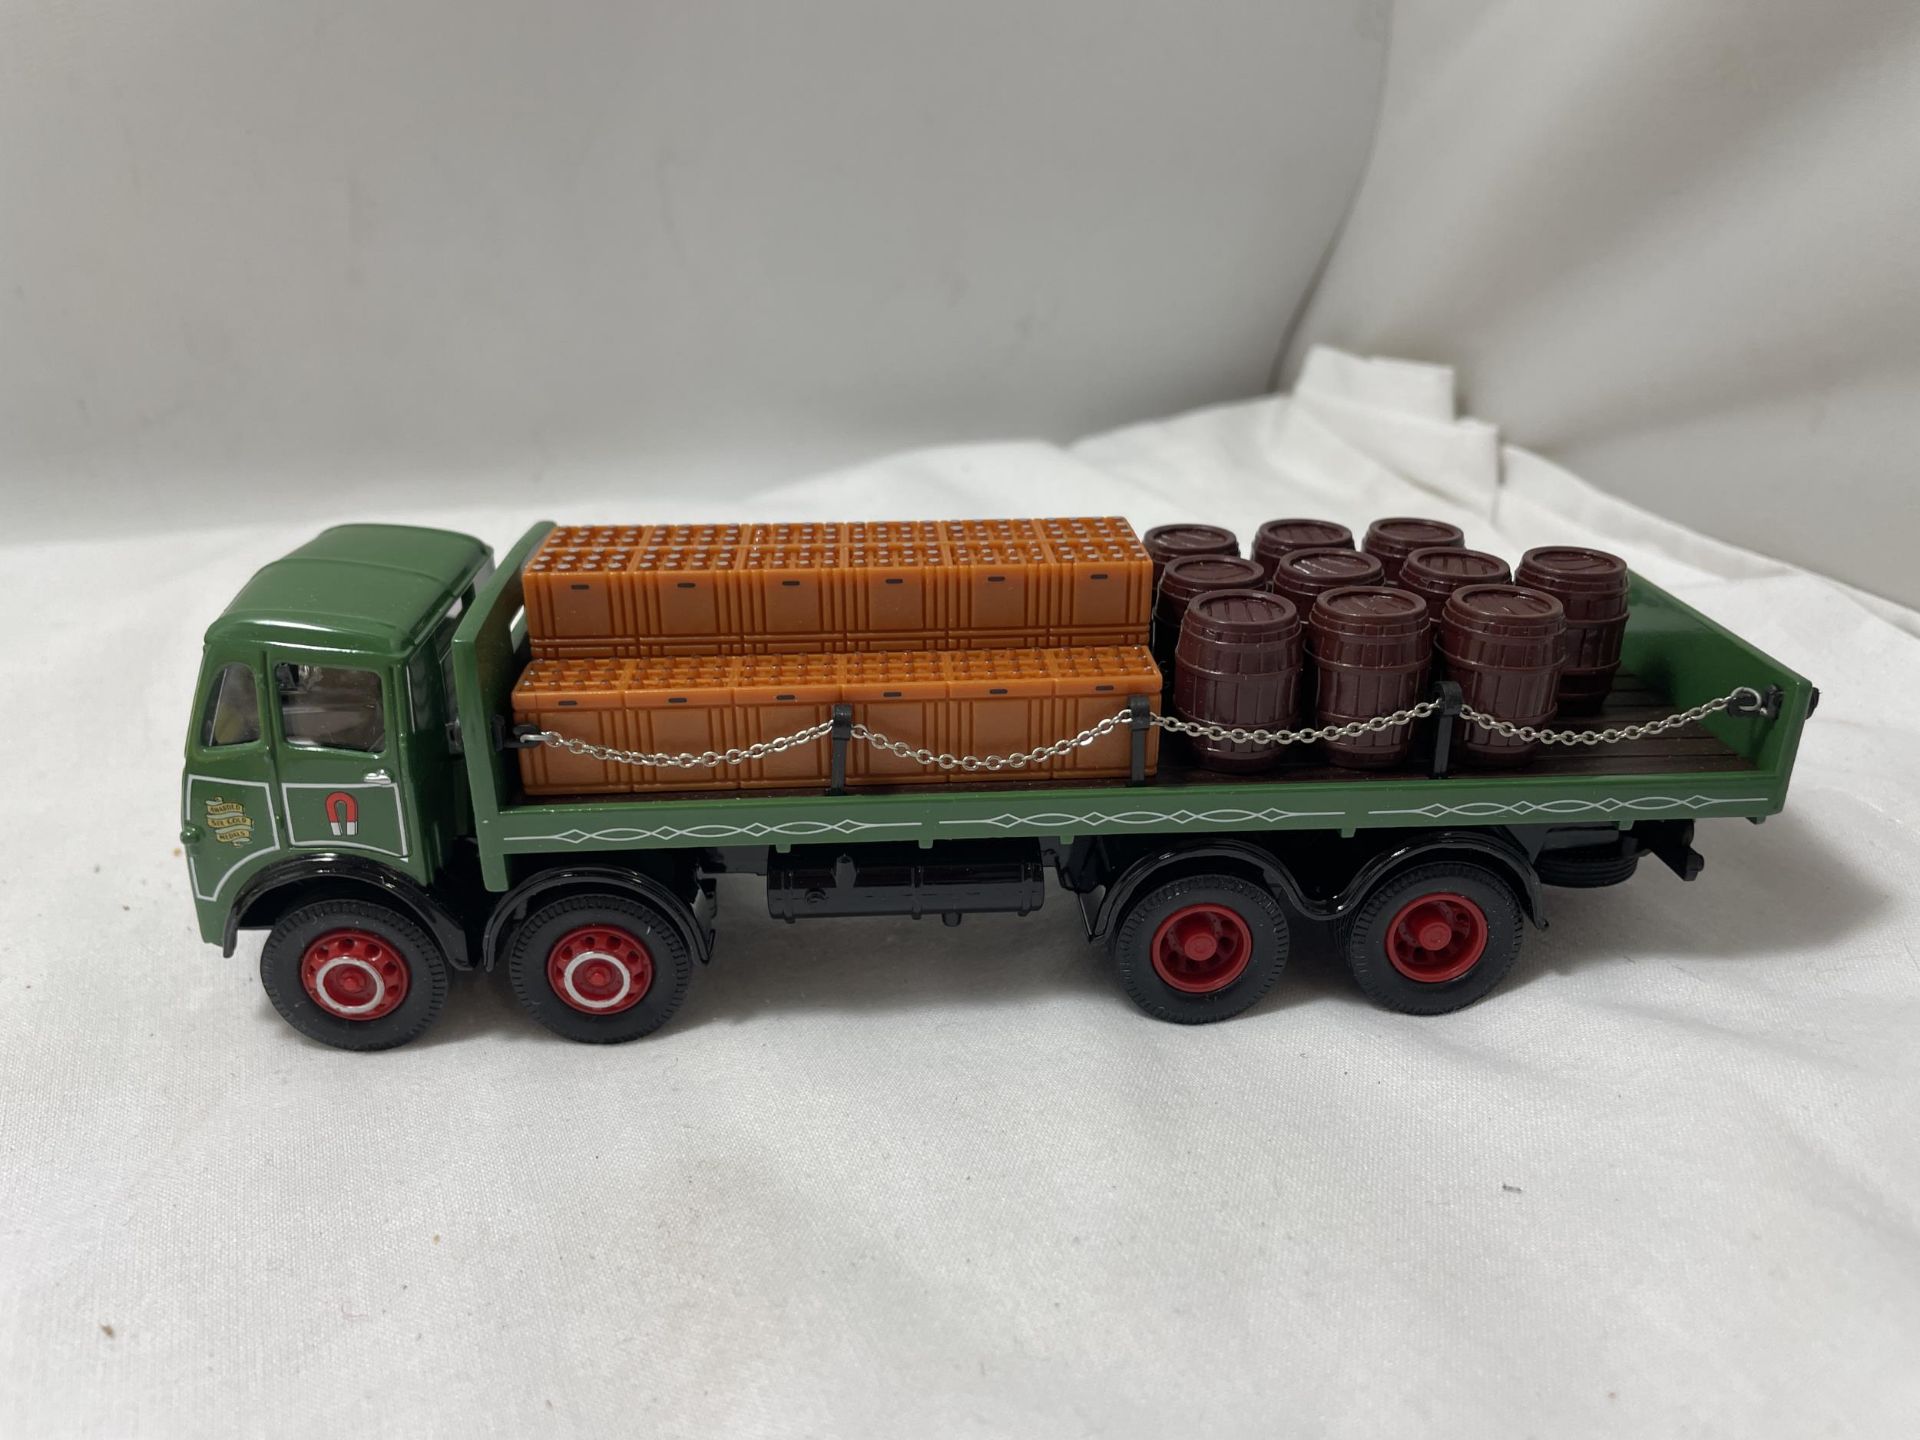 A CORGI CLASSICS LIMITED EDITION 09801 ERF DELIVERY TRUCK SET - Image 2 of 5